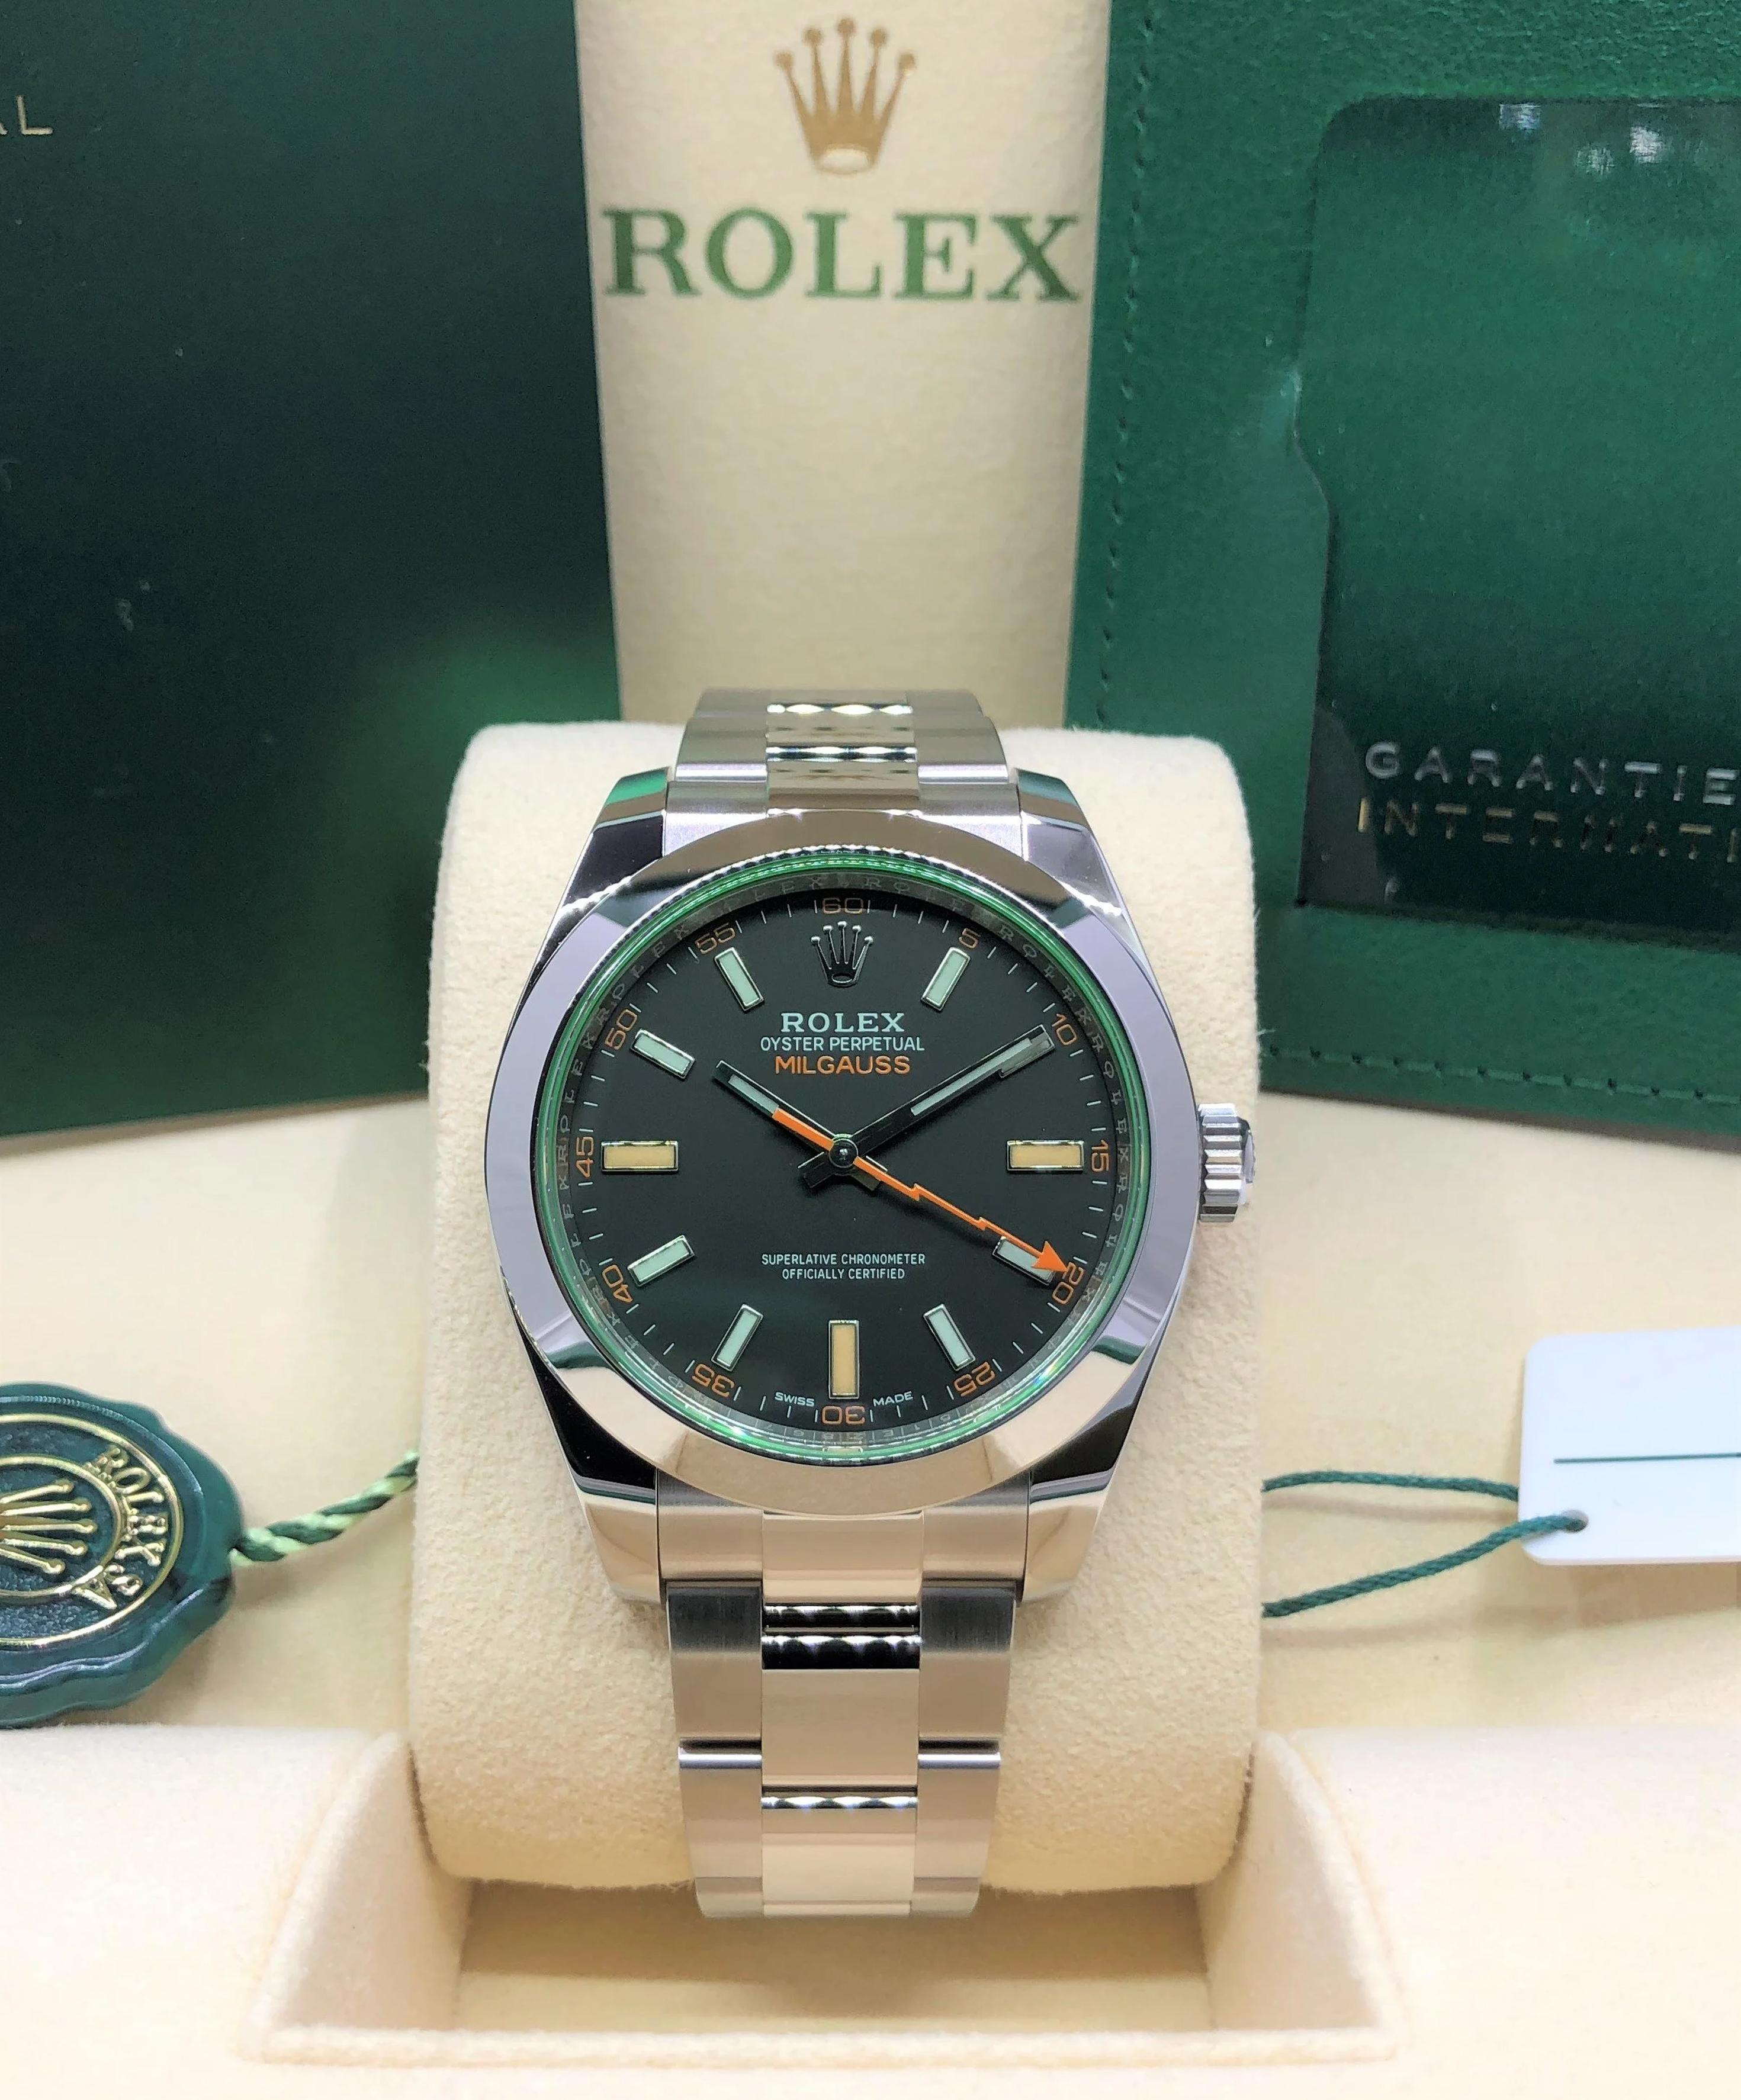 Rolex Milgauss Green Crystal 116400GV has Silver-tone stainless steel case with a silver-tone stainless steel Rolex oyster bracelet. Fixed domed silver-tone stainless steel bezel. Black dial with luminous hands and luminous stick hour markers.